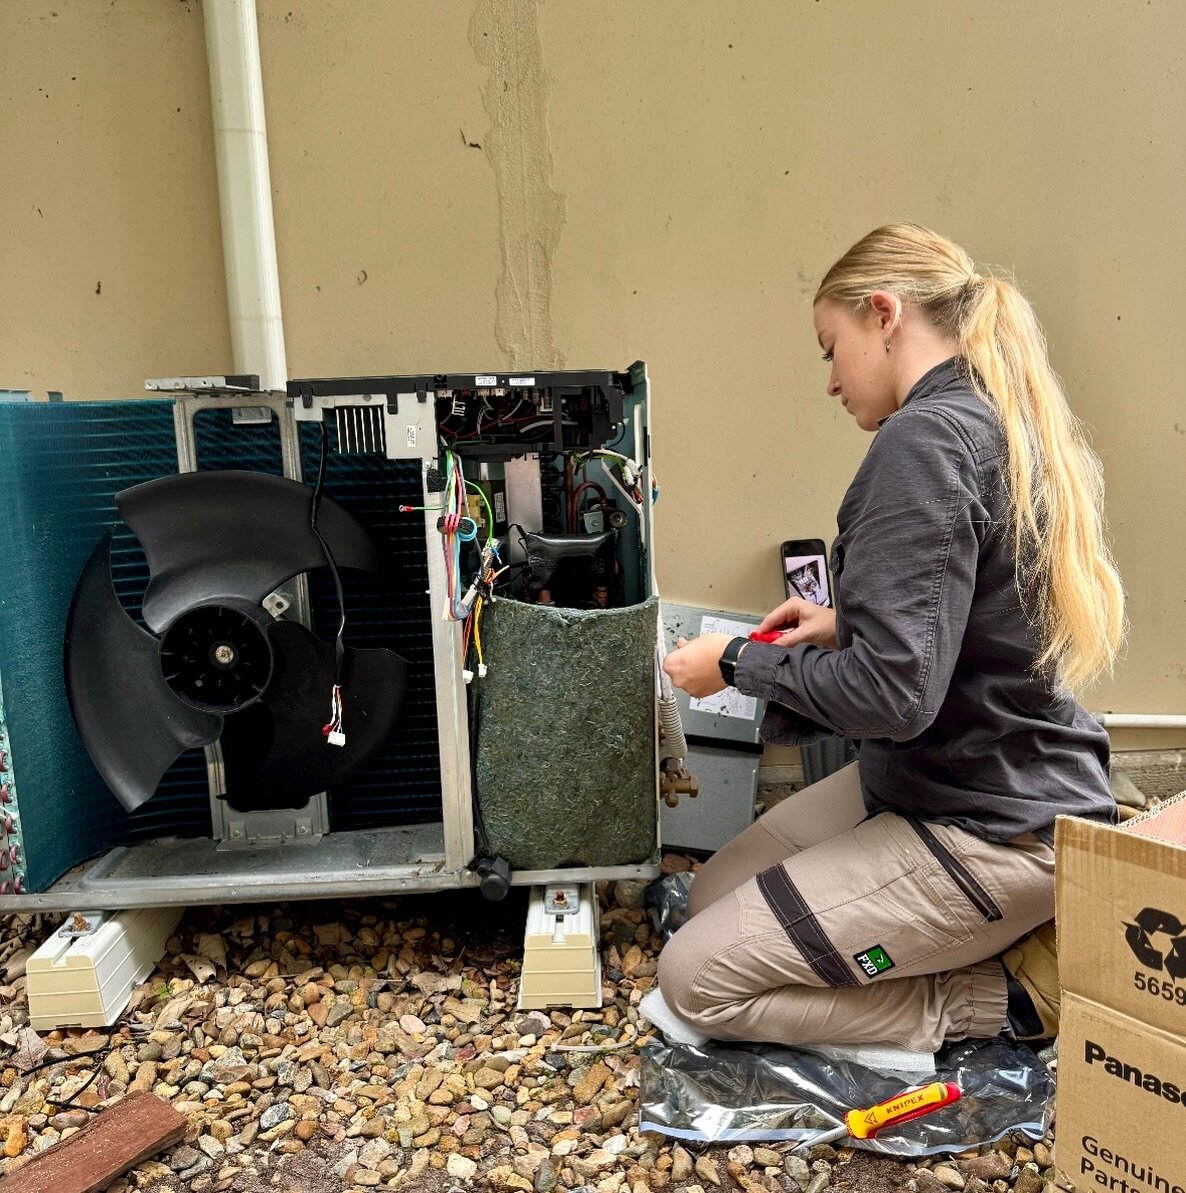 Over these past few weeks we have seen a HUGE number of air conditioning breakdowns coming through. Providing great opportunities for our apprentices to learn the ropes, guided by our amazing tradesmen! ⚙️🪛 

#breakdowns #repairs #faultfinding #trai